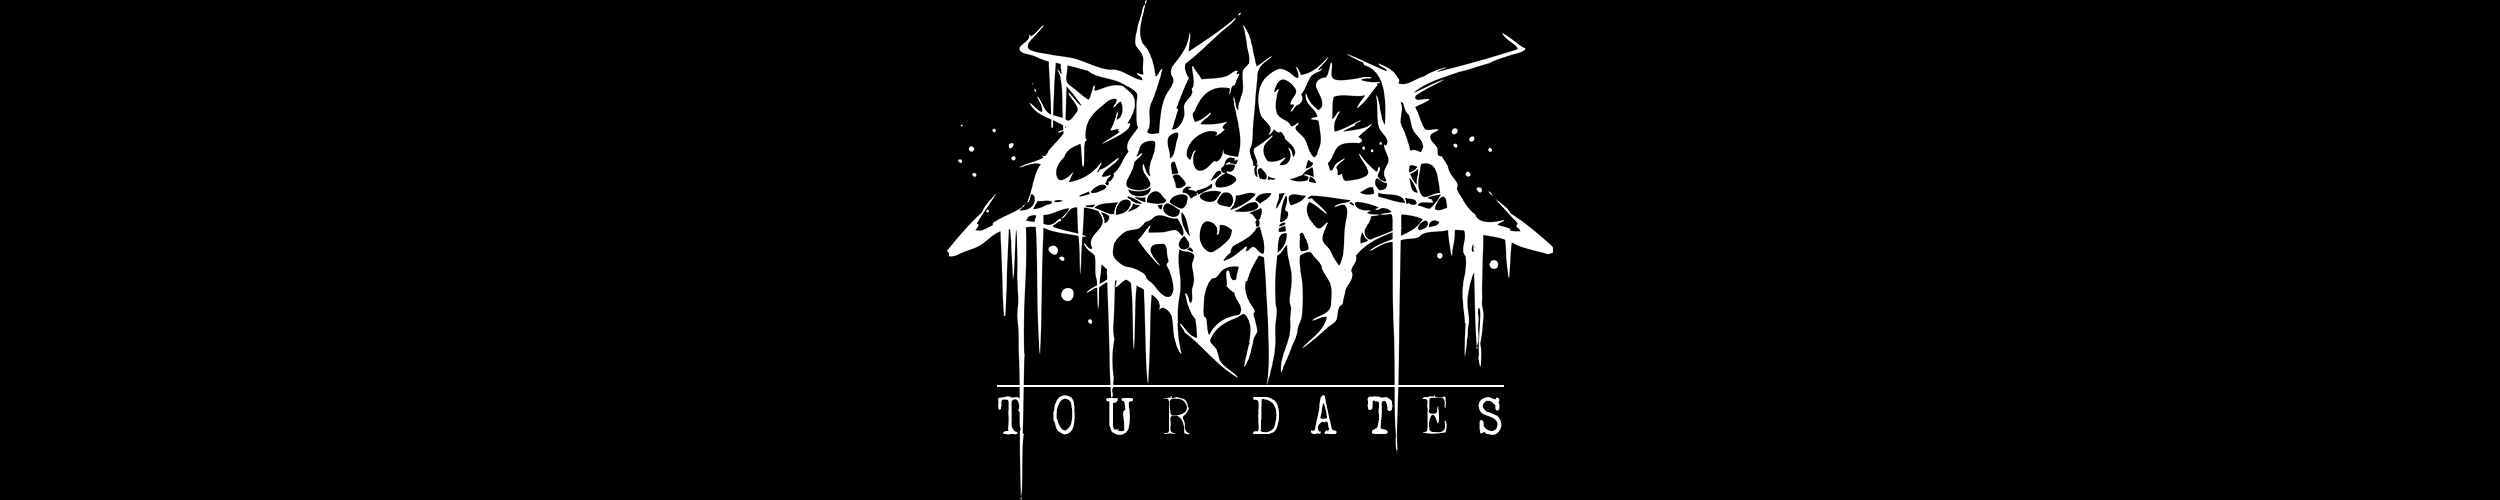 chelsea grin left to suffer tour